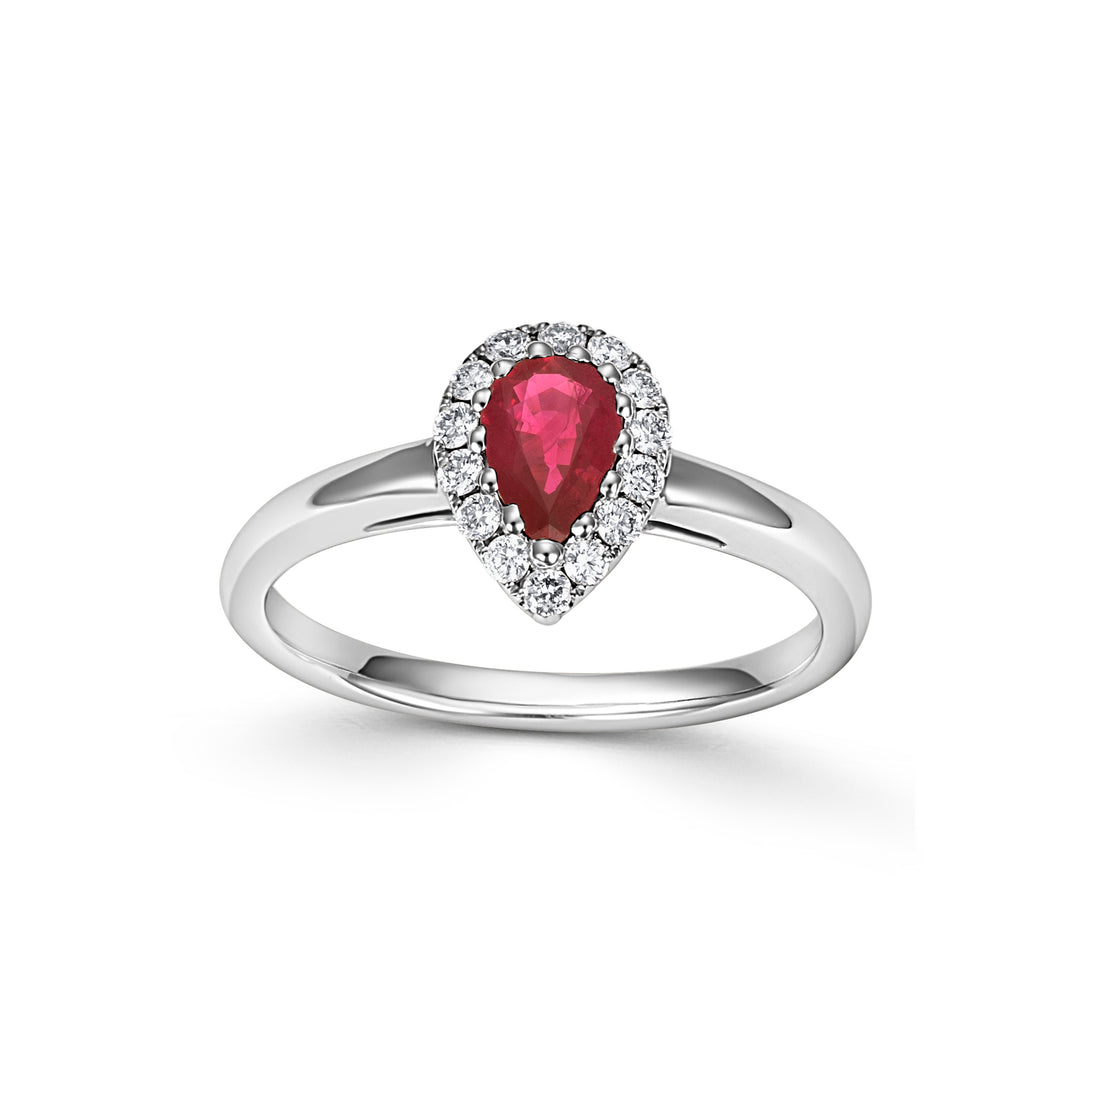 18CT White Gold Pear-shaped Ruby with Diamond Halo Ring